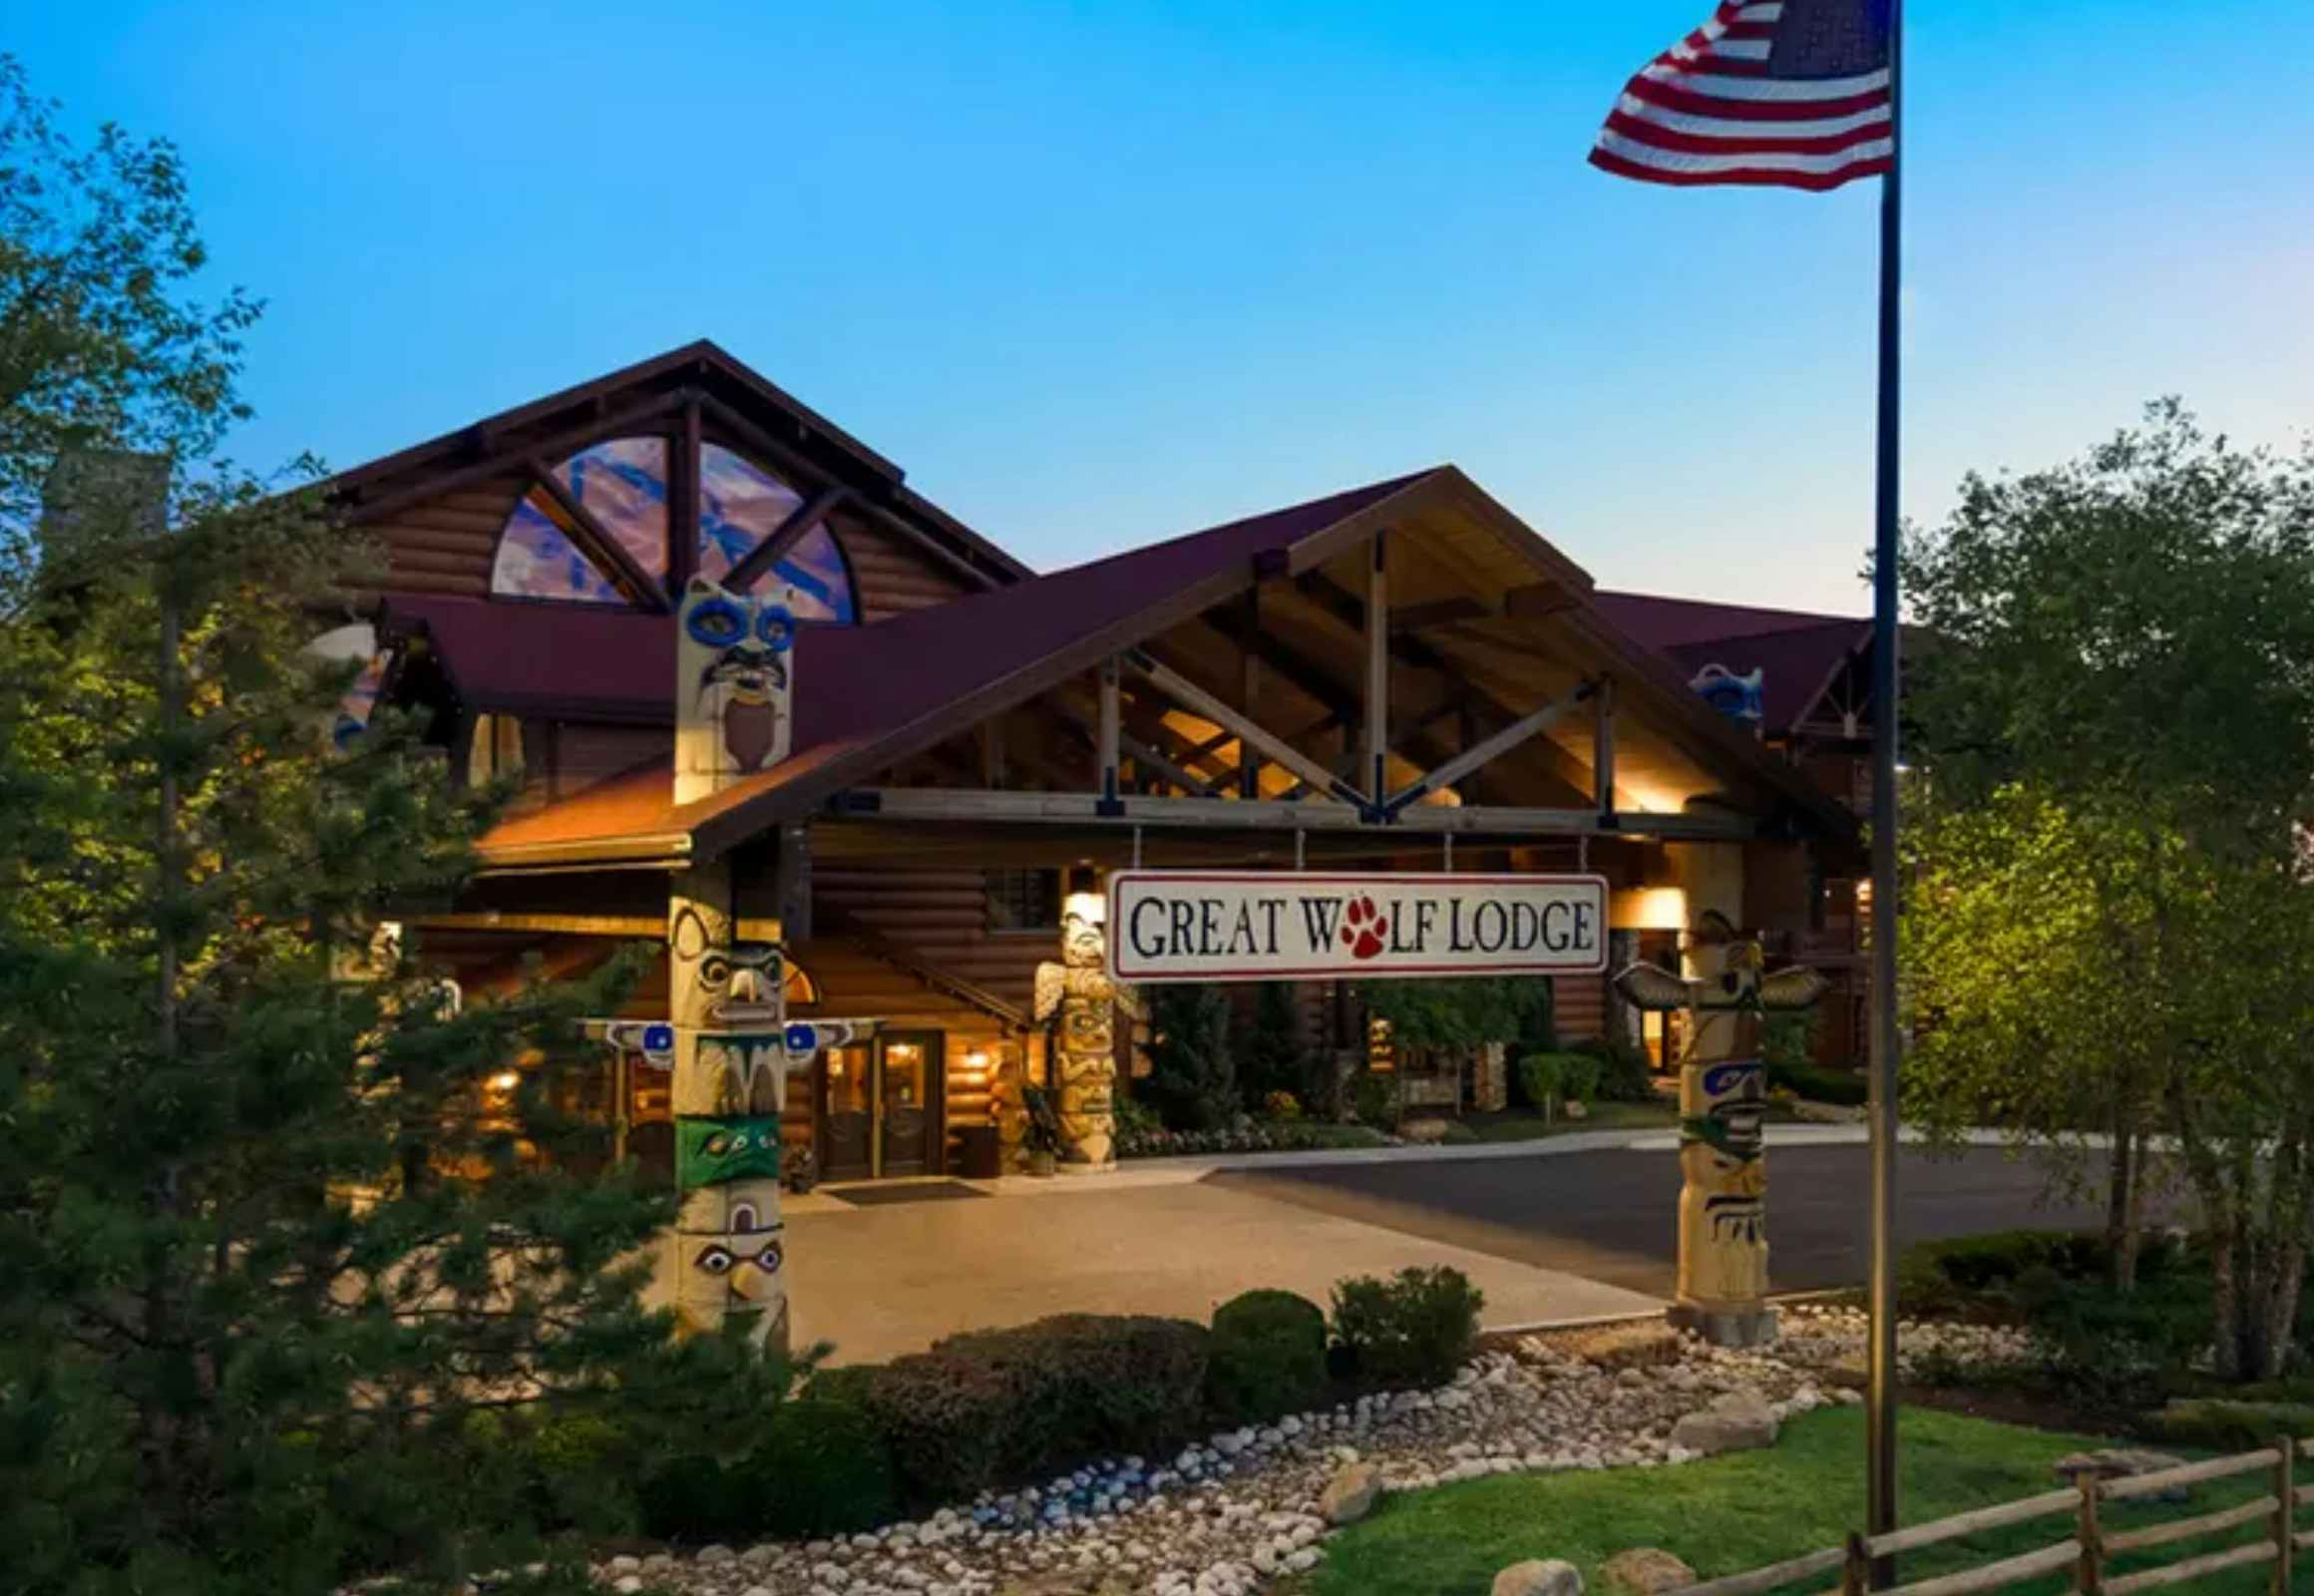 Great Wolf Lodge, as Low as $89 per Night at Groupon